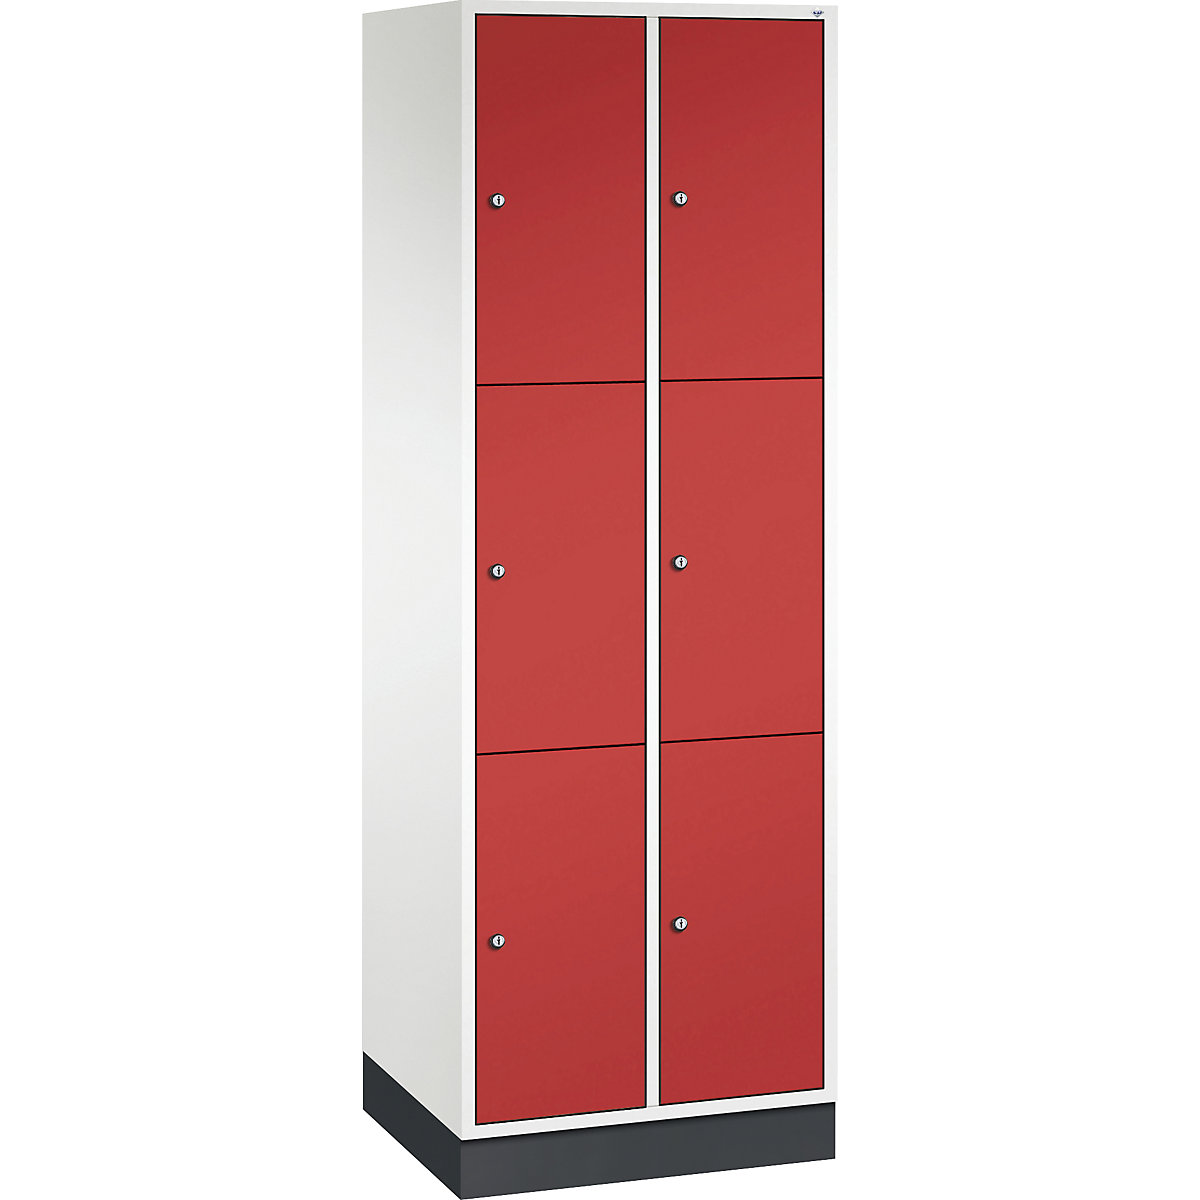 INTRO steel compartment locker, compartment height 580 mm – C+P, WxD 620 x 500 mm, 6 compartments, pure white body, flame red doors